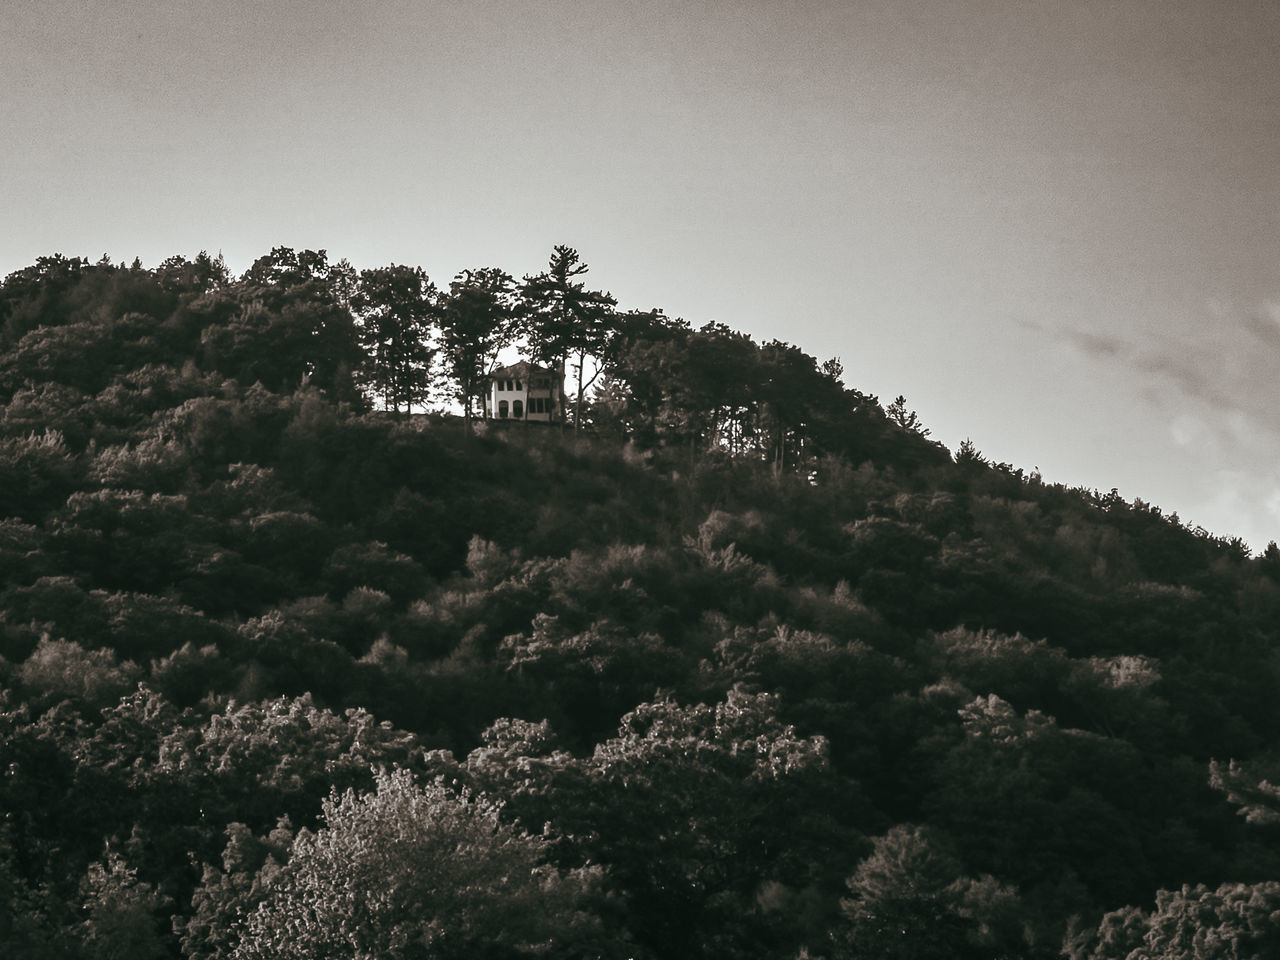 nature, tree, plant, hill, sky, darkness, environment, beauty in nature, land, monochrome, forest, no people, cloud, black and white, landscape, scenics - nature, pinaceae, coniferous tree, morning, horizon, tranquility, growth, outdoors, monochrome photography, pine tree, rural area, sunlight, pine woodland, non-urban scene, travel, tranquil scene, travel destinations, leaf